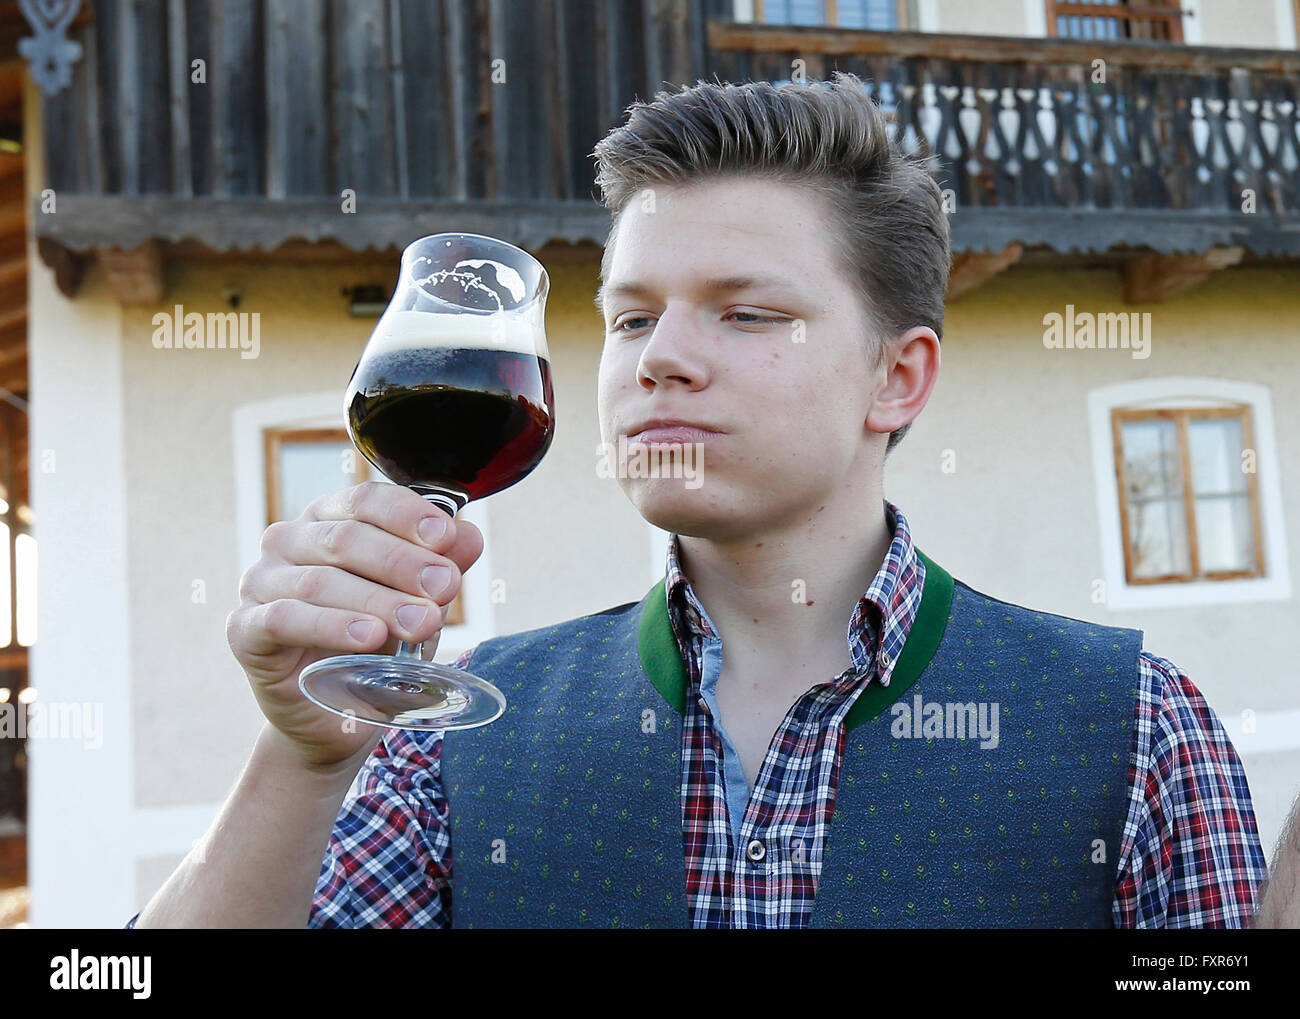 Gstadt, Germany. 12th Apr, 2016. Beer sommelier Luis Sailer savours different types of beer in Gstadt, Germany, 12 April 2016. 16-year-old student Luis Sailer is the youngest beer sommelier in the world. PHOTO: UWE LEIN/dpa/Alamy Live News Stock Photo